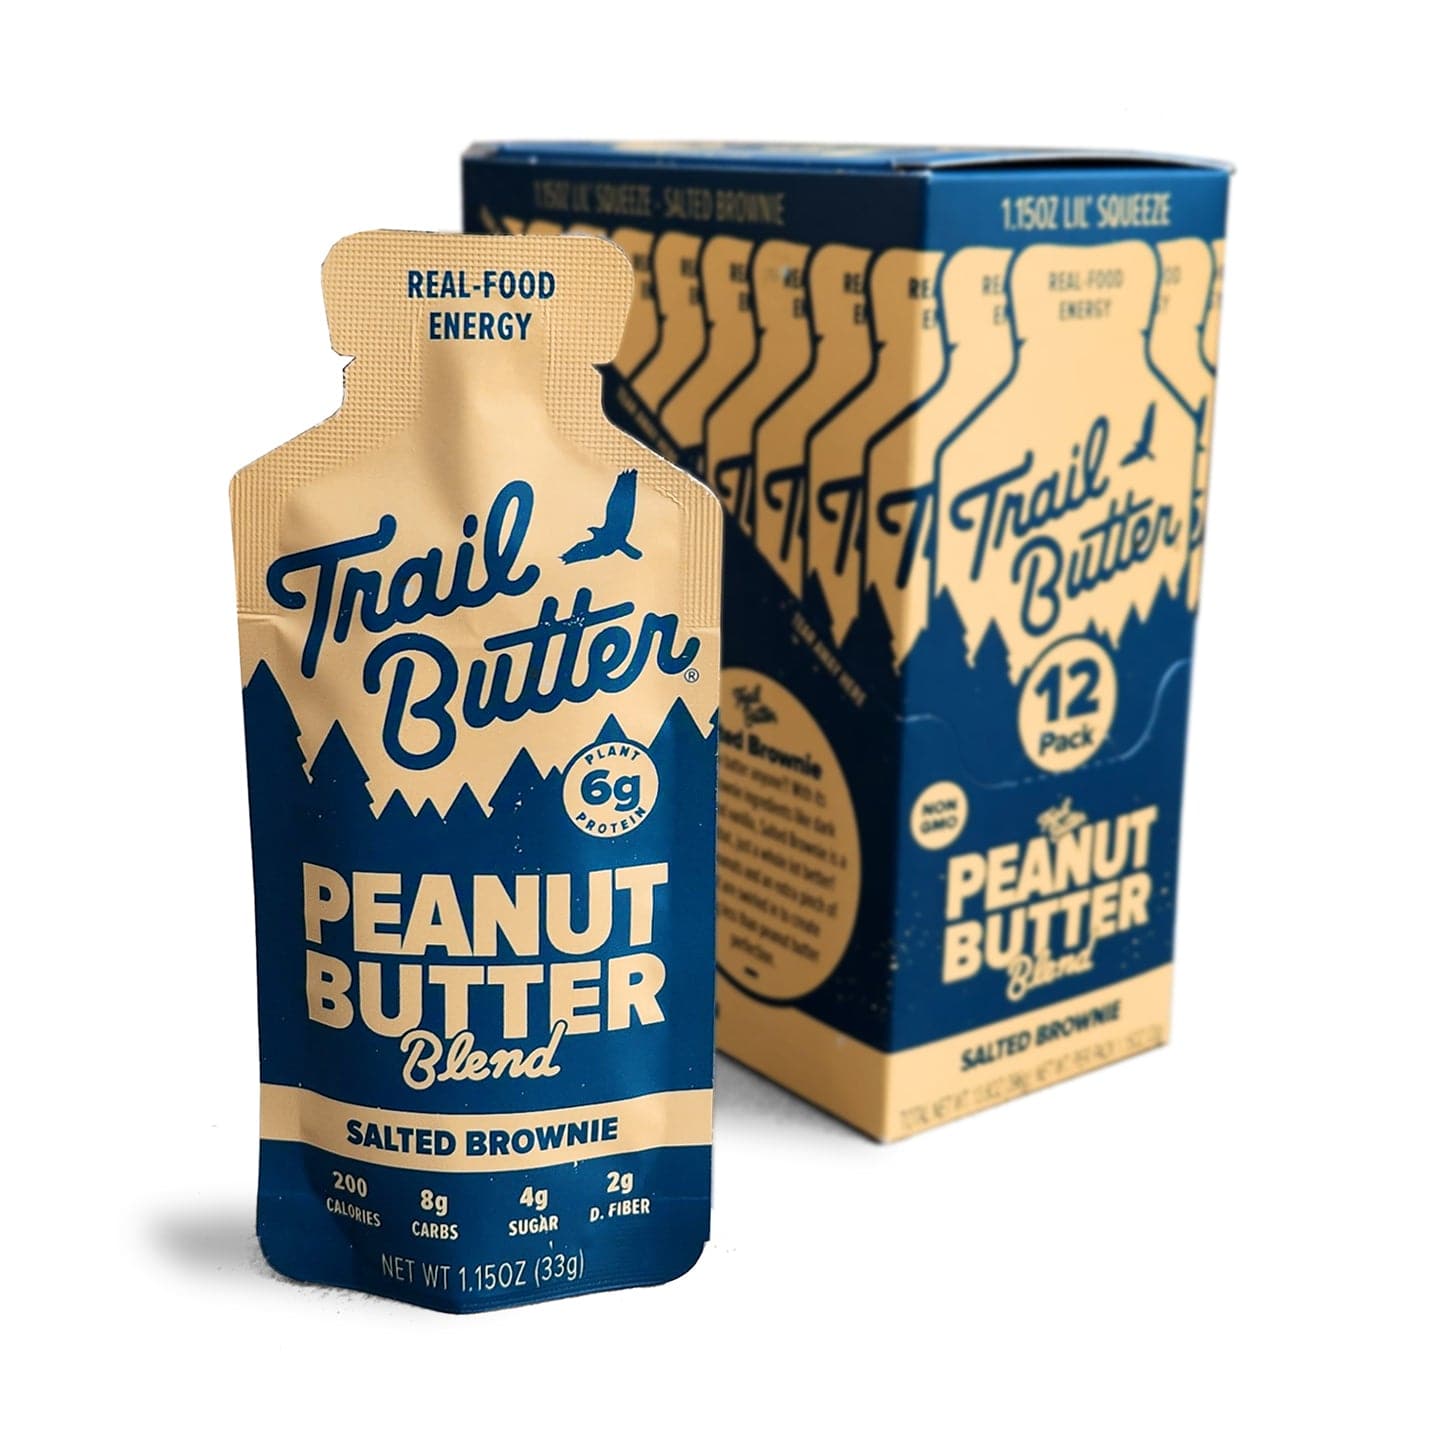 Trail Butter Nut Butter Box of 12 / Salted Brownie and Peanut Nut Butter ‘Lil Squeeze’ Pouches XMiles